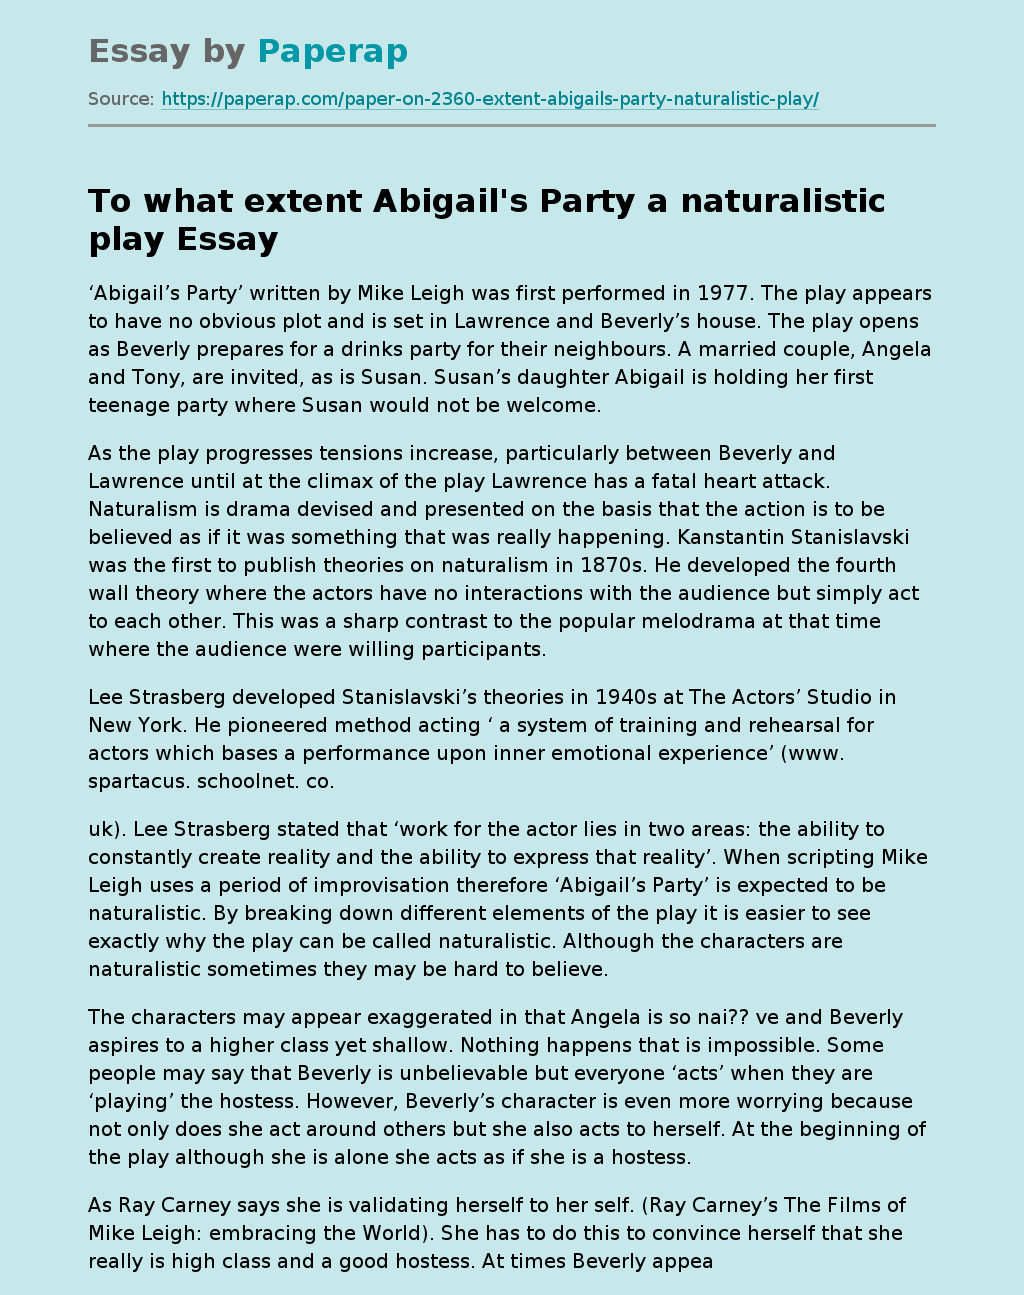 To what extent Abigail's Party a naturalistic play